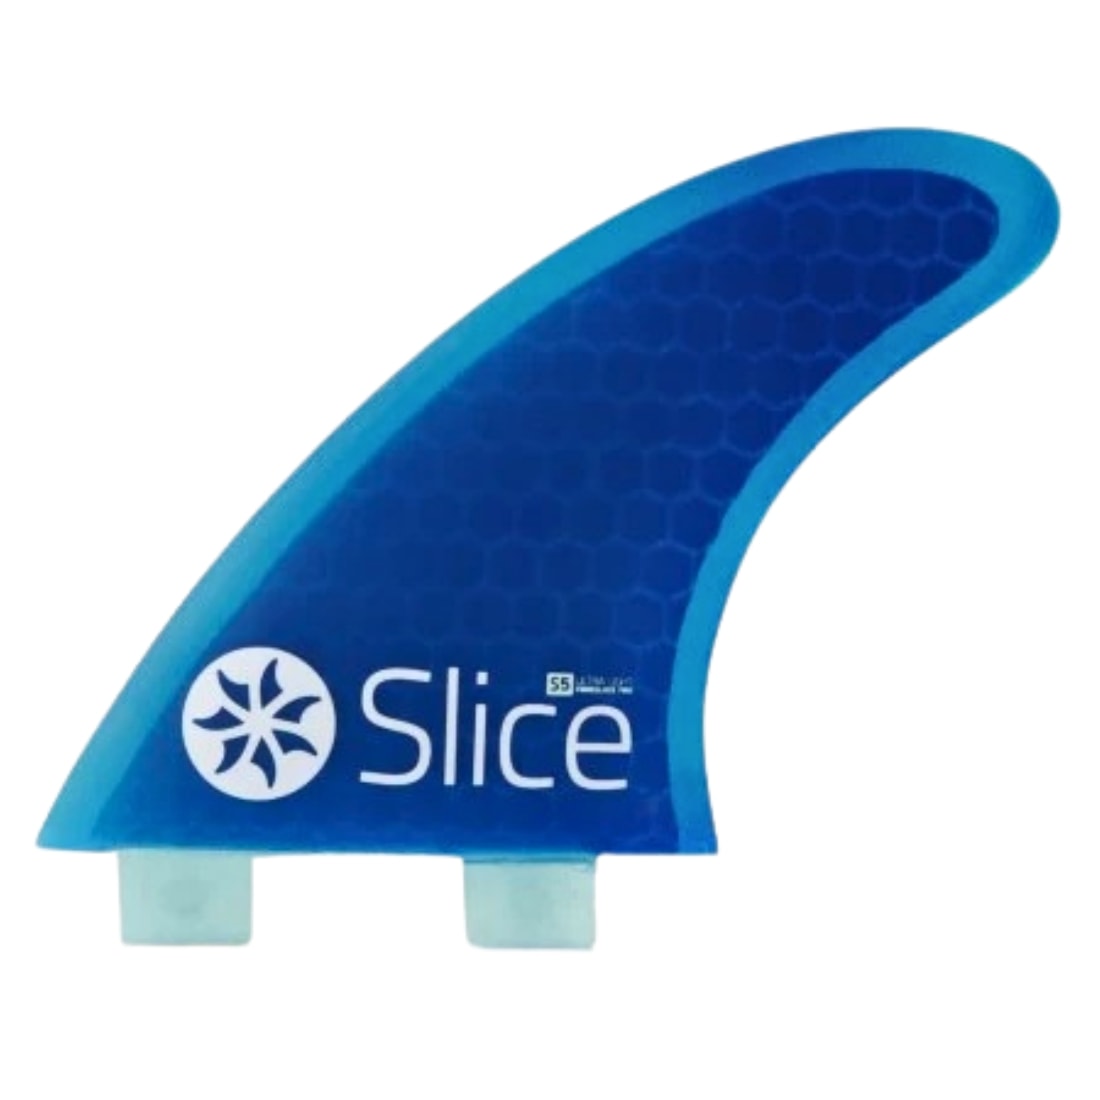 Northcore Slice Ultralight Hex Core S5 FCS Compatible Surfboard Fins - Blue - FCS 1 Fins by Northcore Large Fins